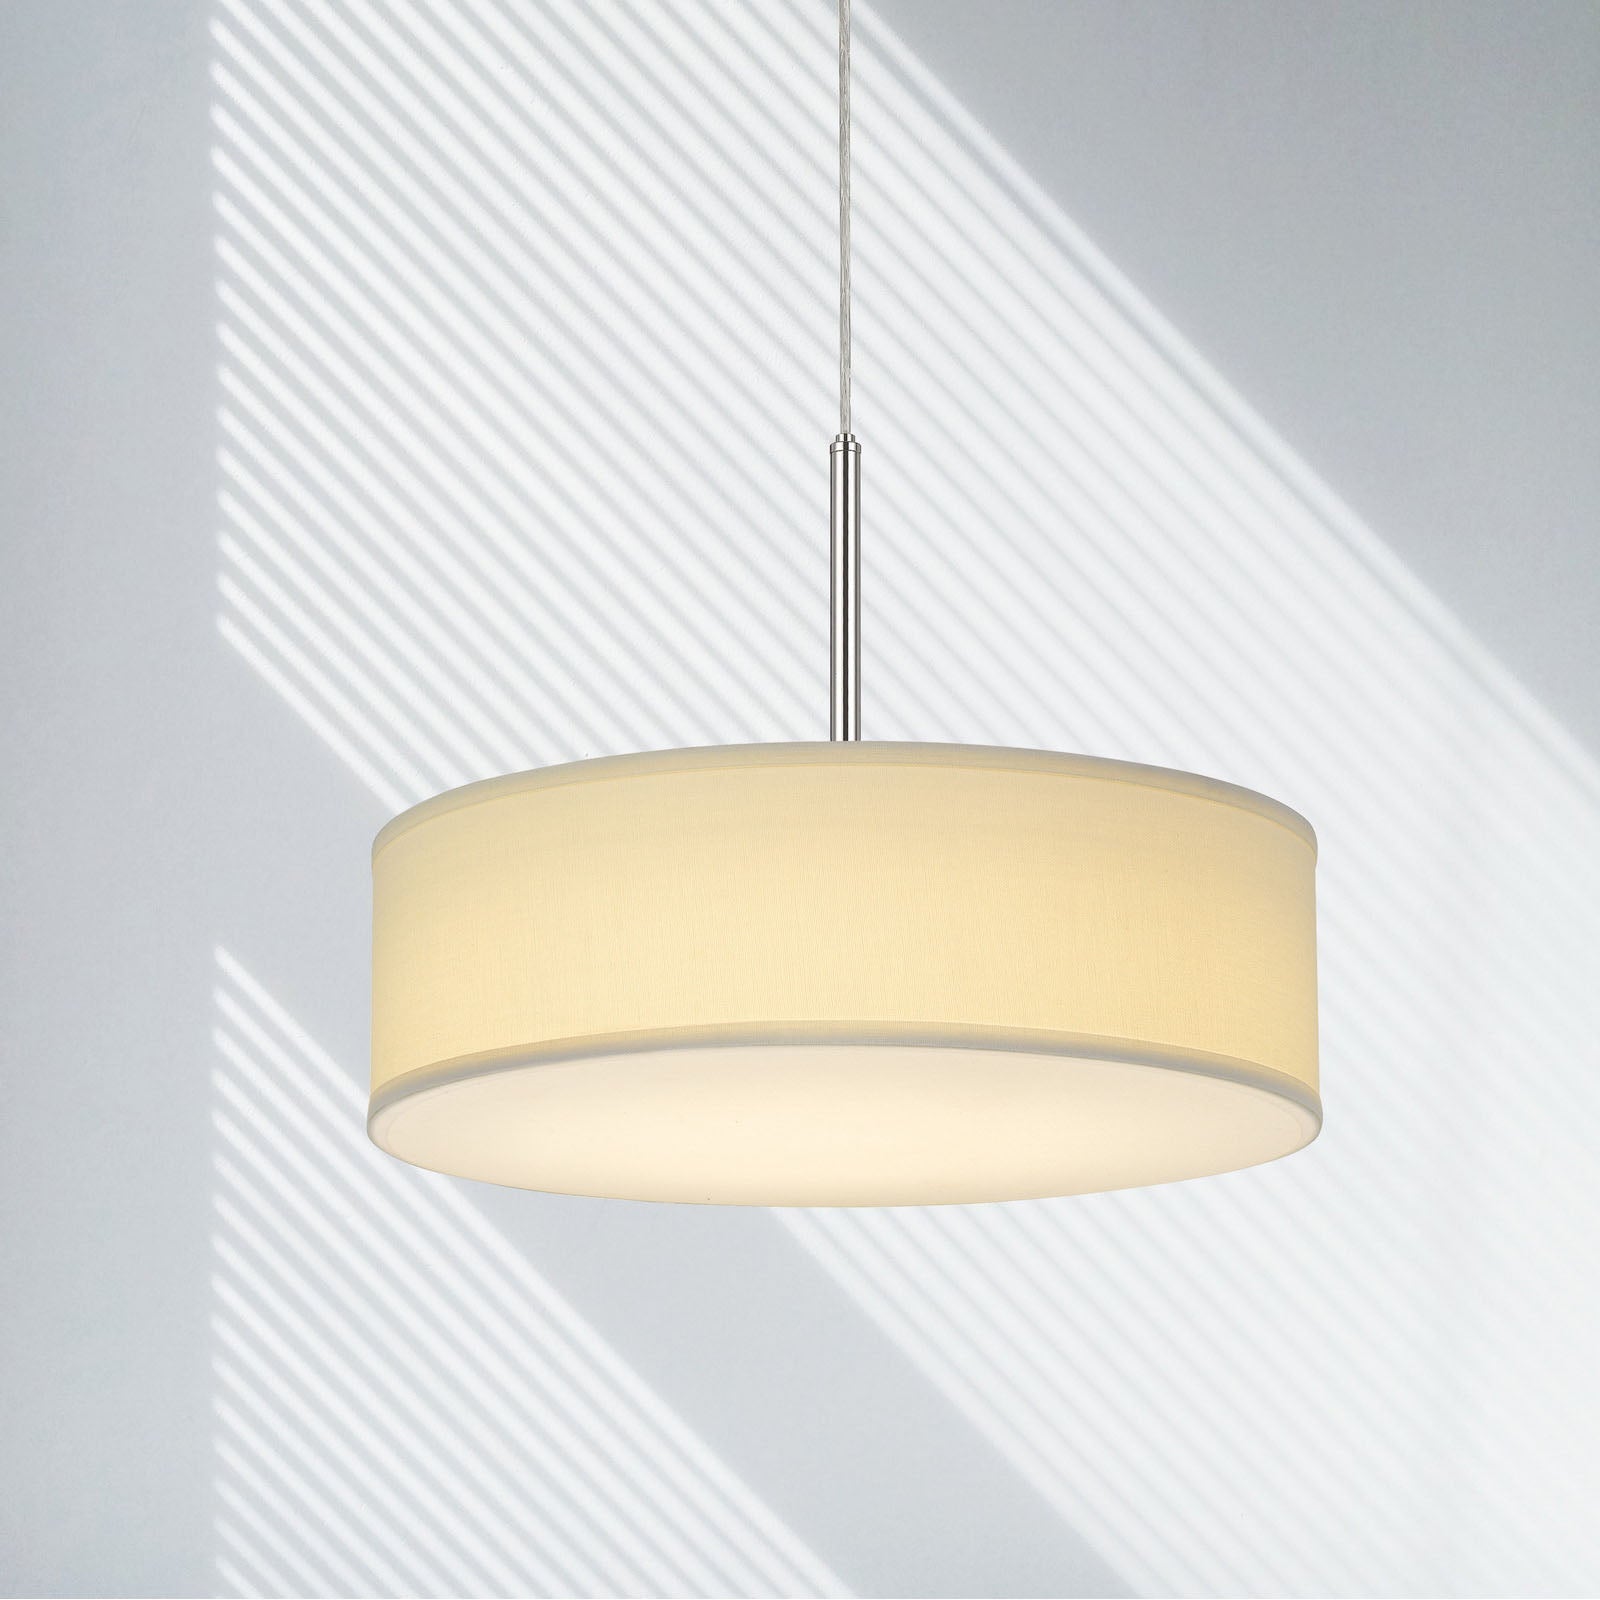 Cal Lighting Led 18W Dimmable Pendant With Diffuser And Hardback Fabric Shade 